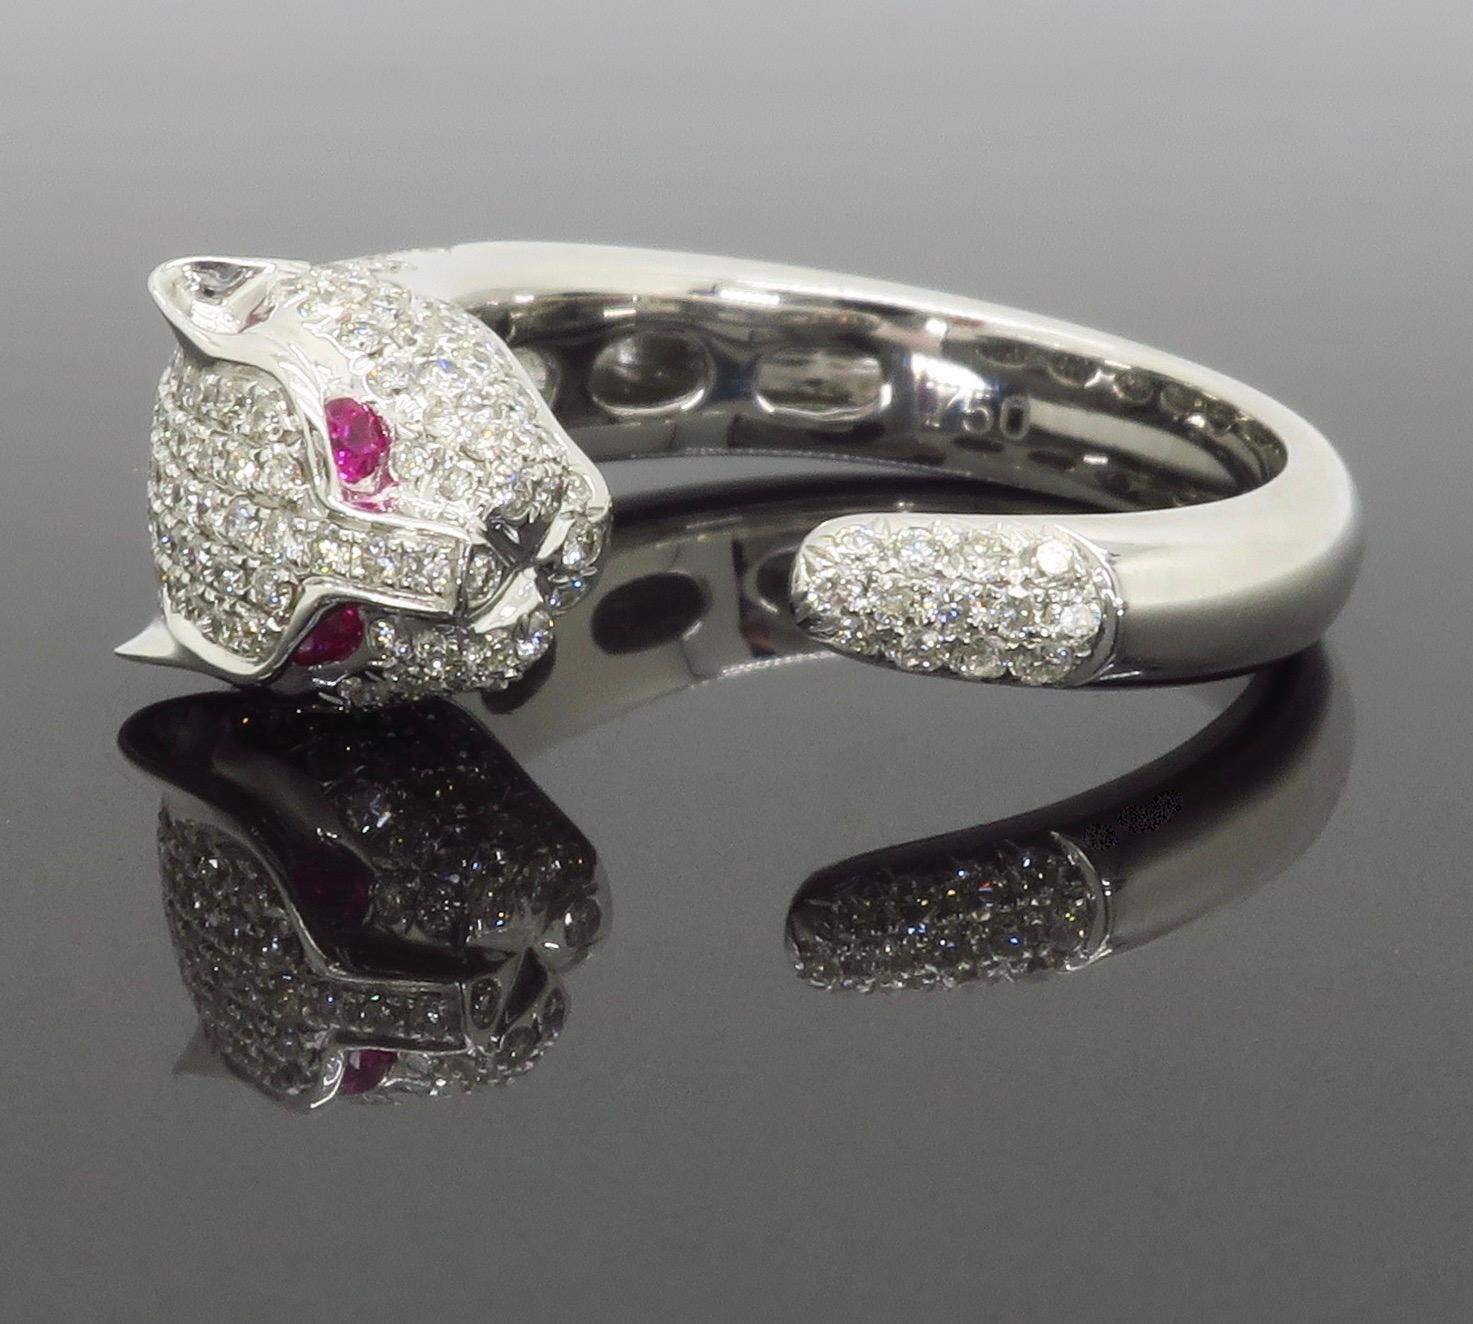 Panther Diamond and Ruby Ring Made in 18 Karat White Gold 12